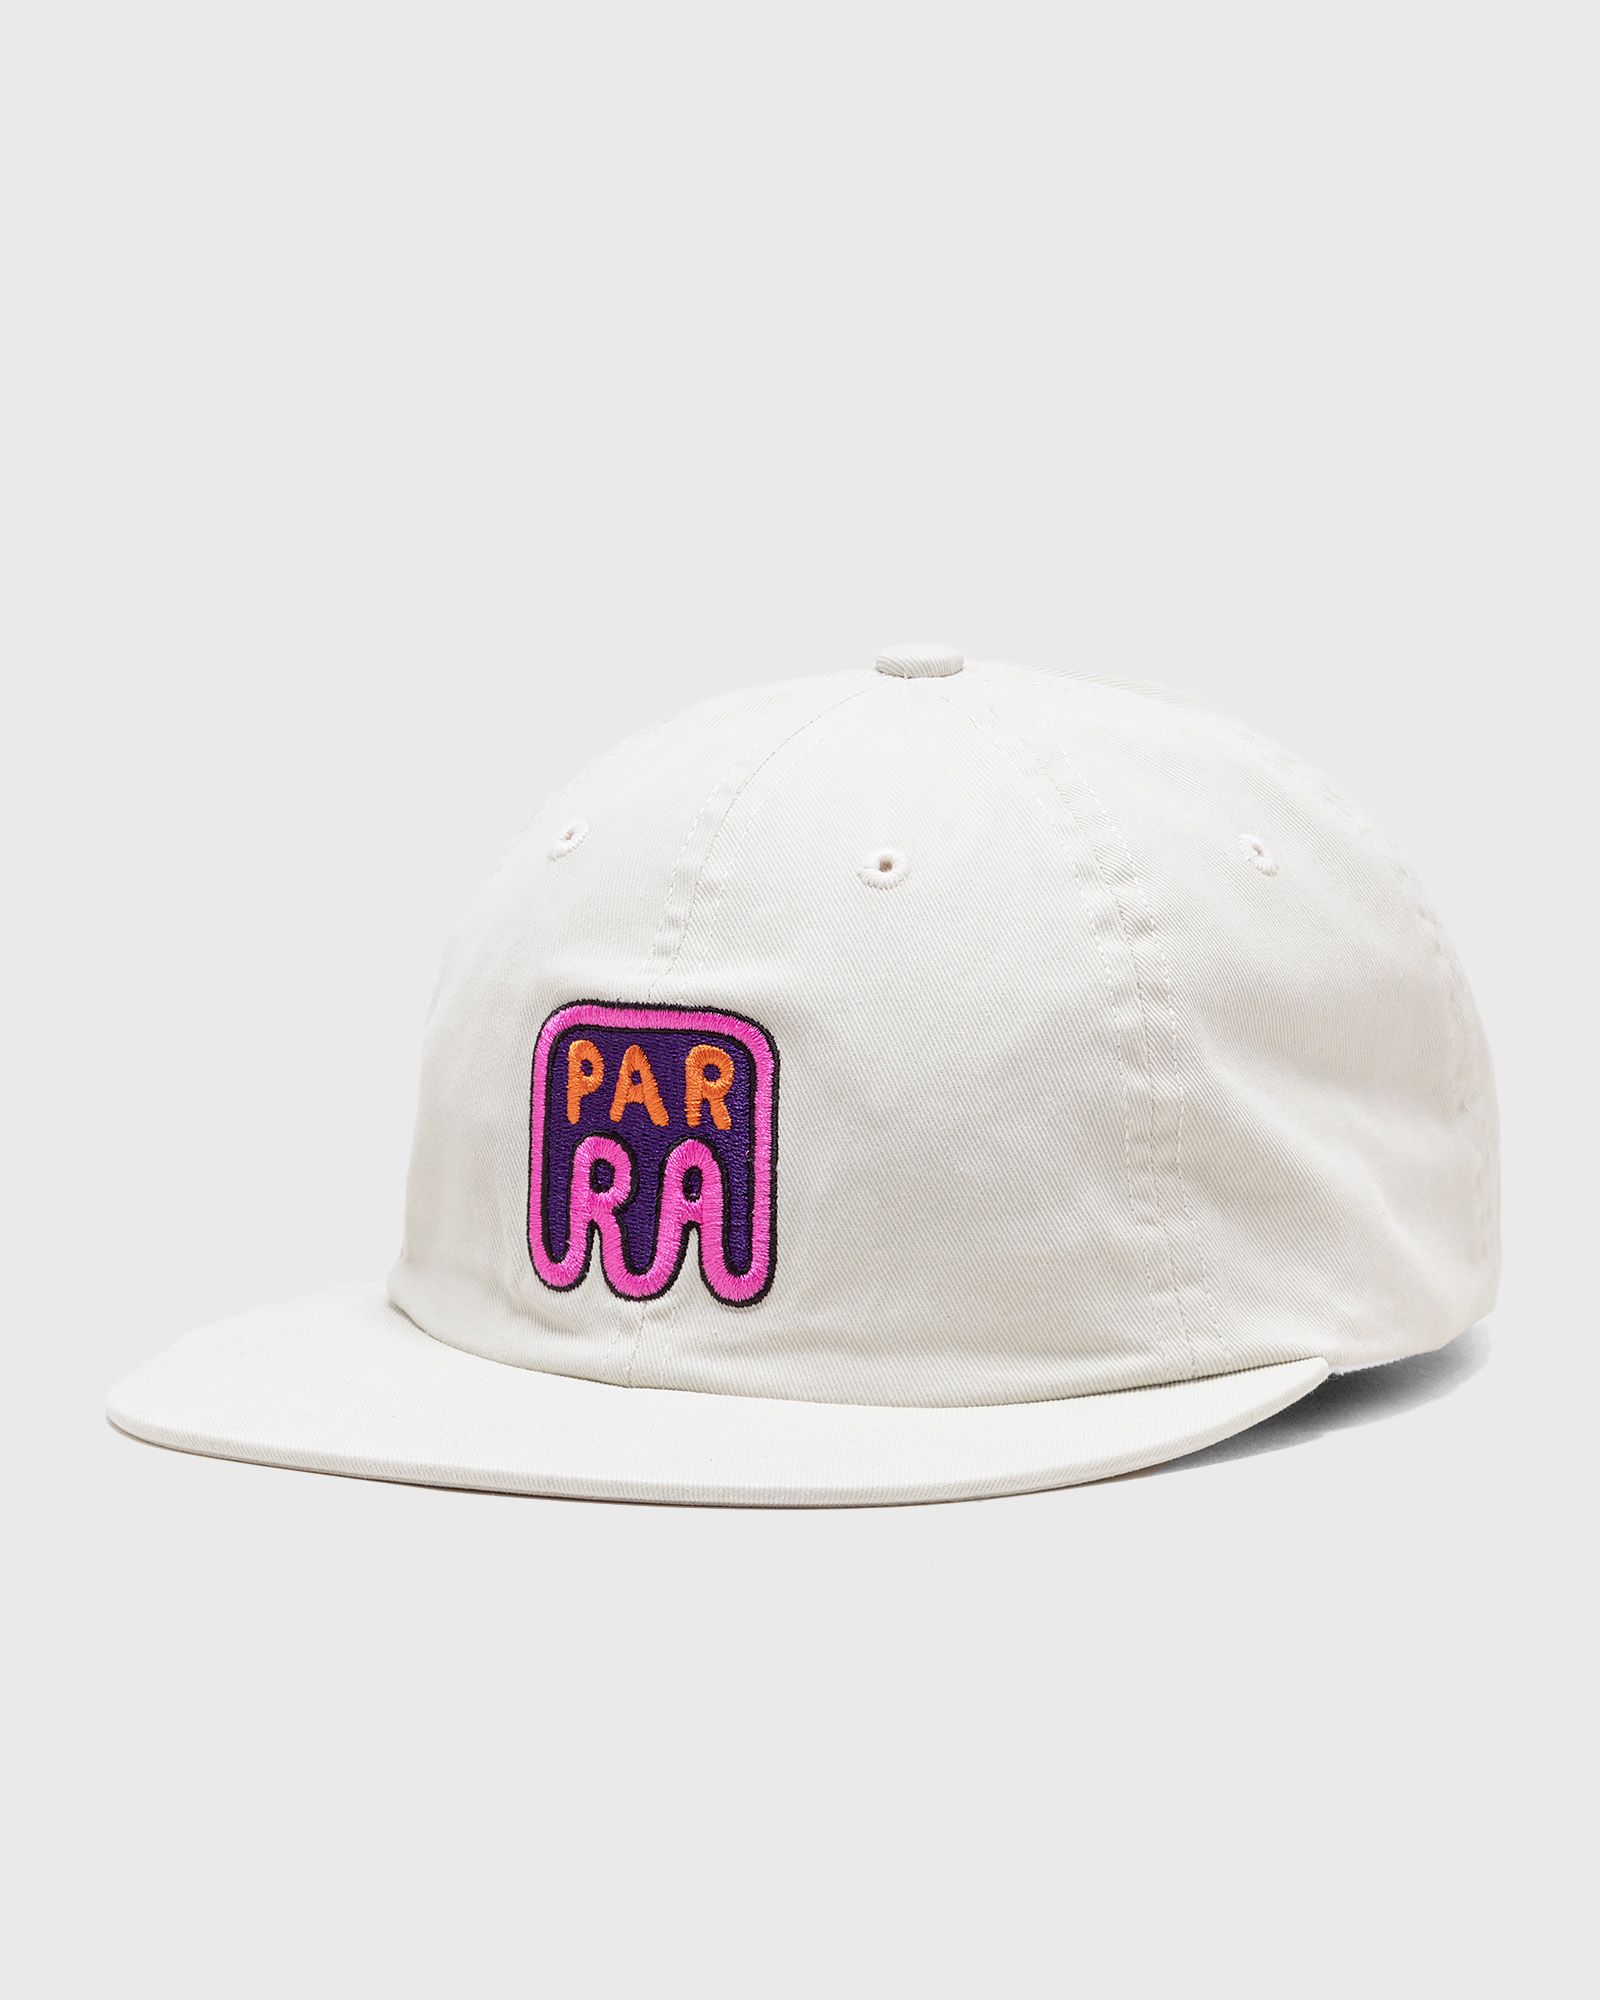 By Parra - fast food logo 6 panel hat men caps white in größe:one size